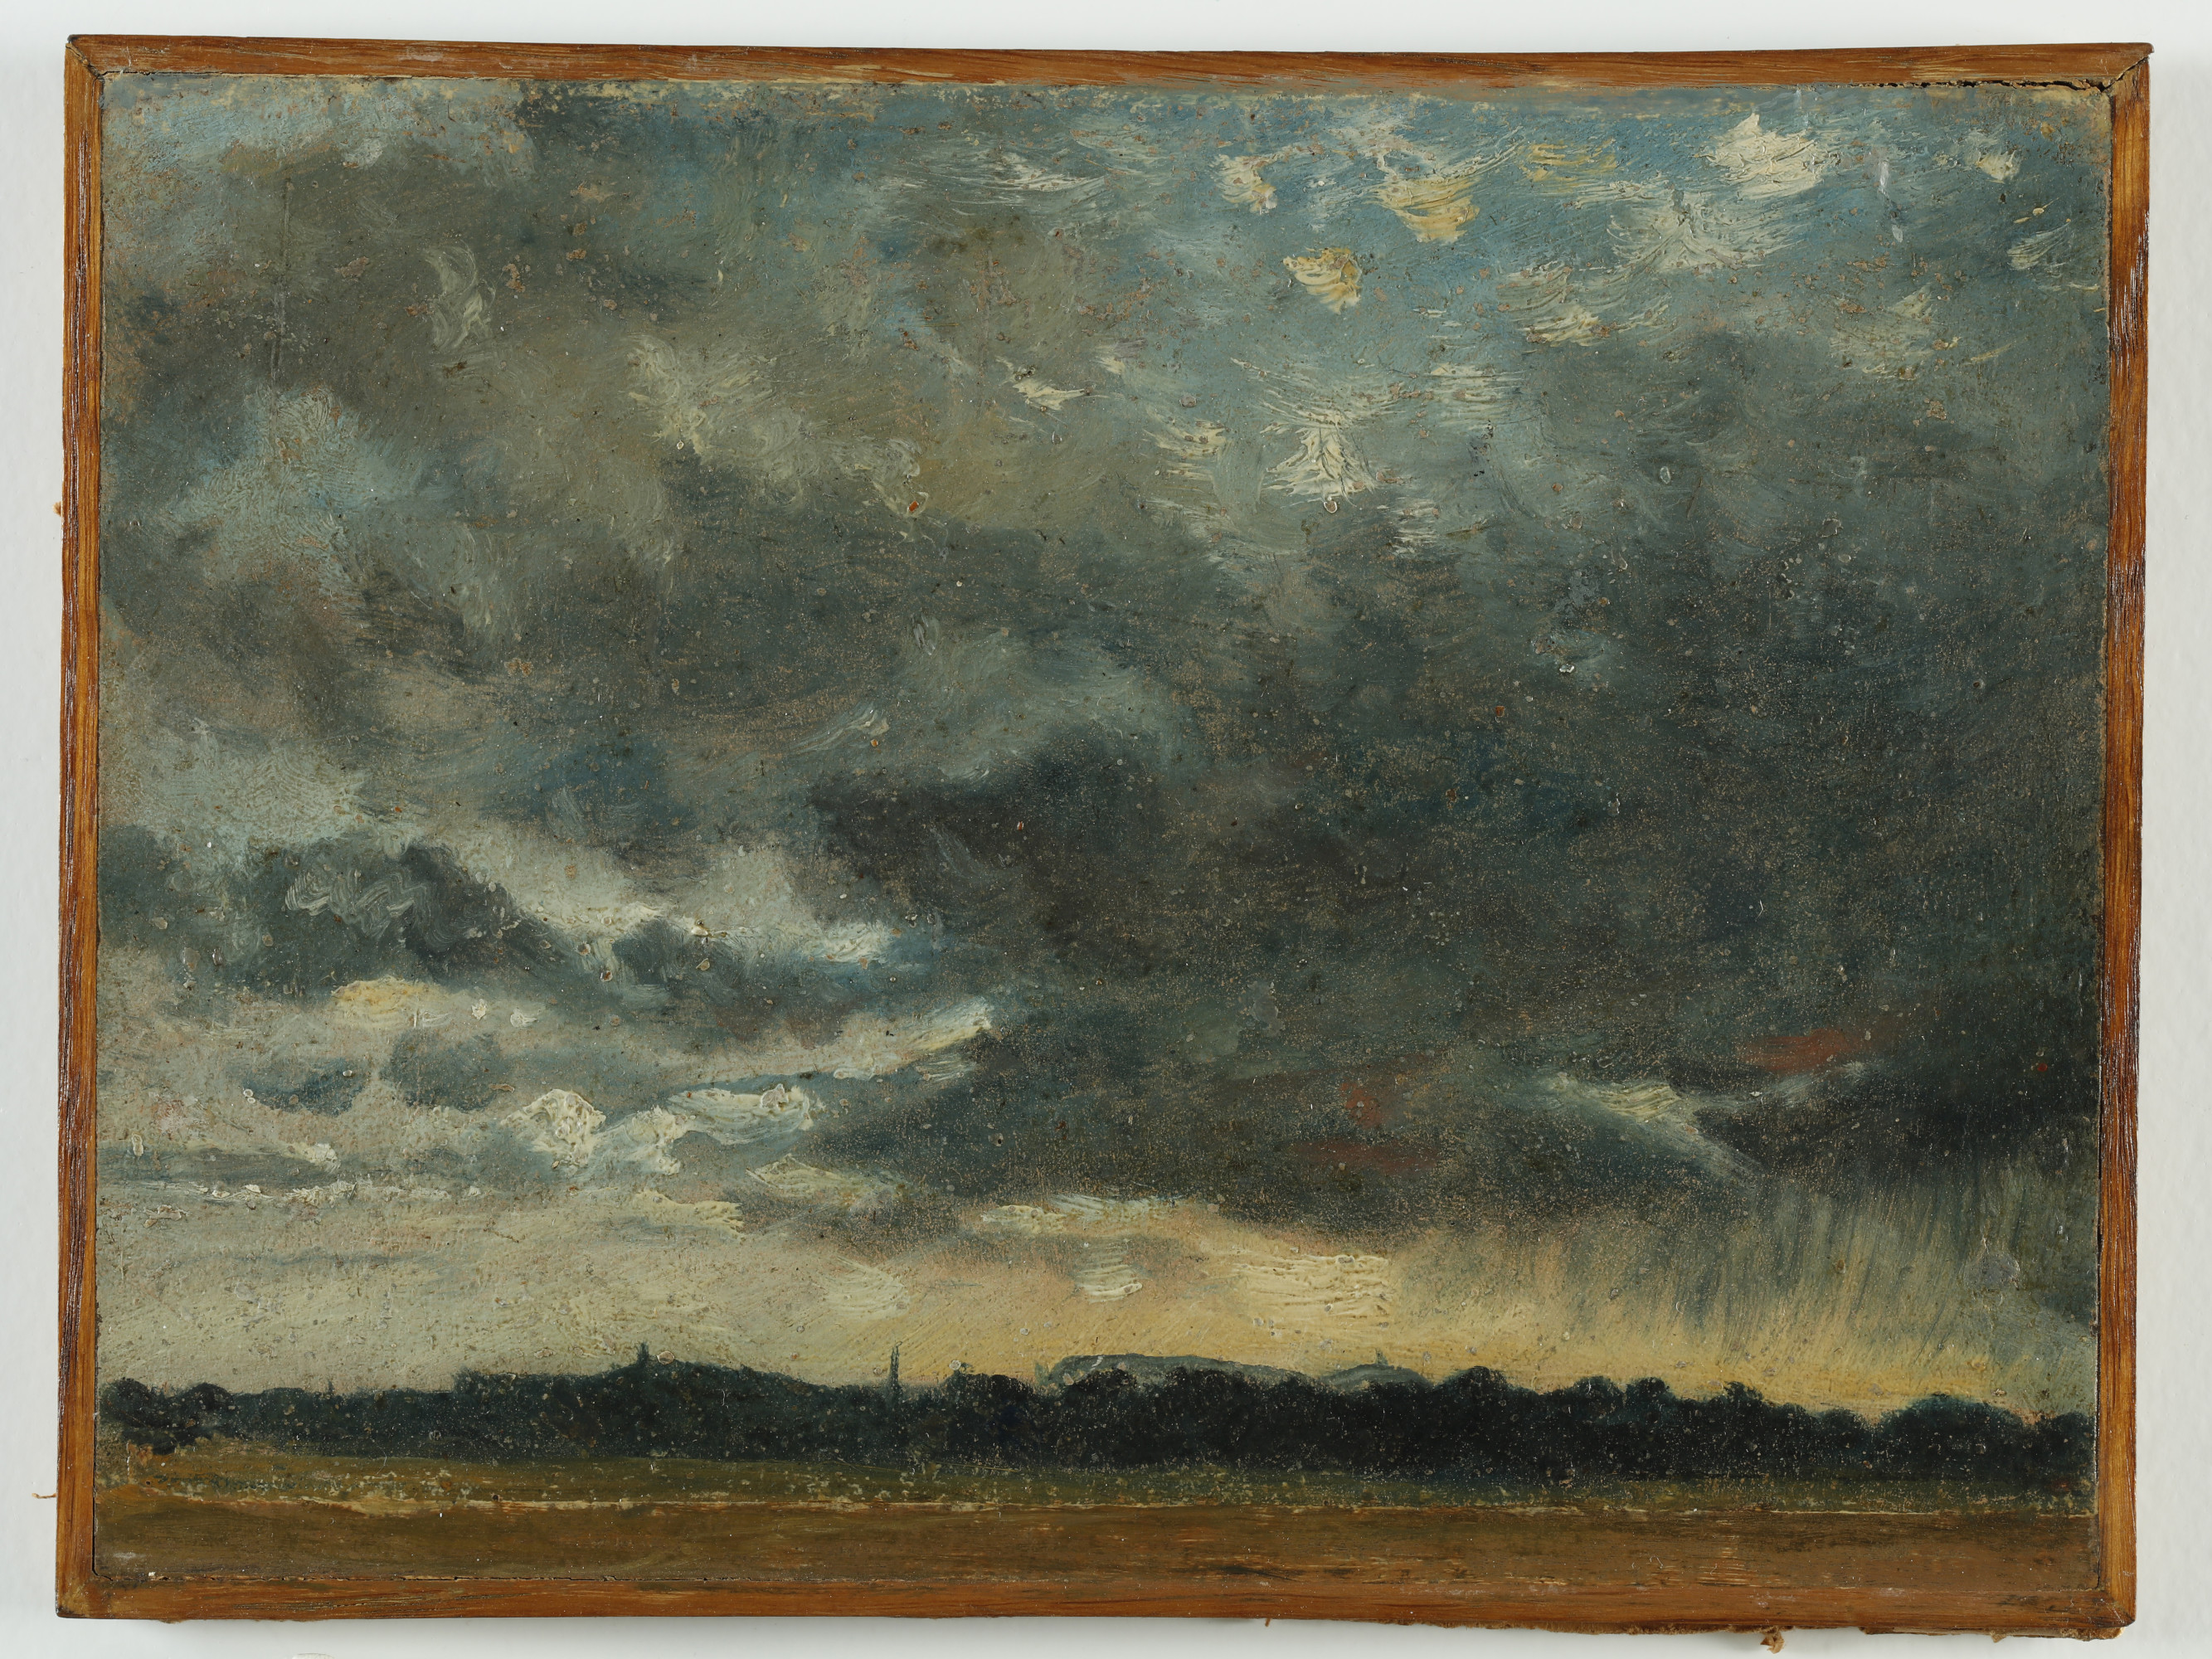 A landscape sketch in oils on paper with most of the picture devoted to a stormy sky and a strip of silhouetted trees